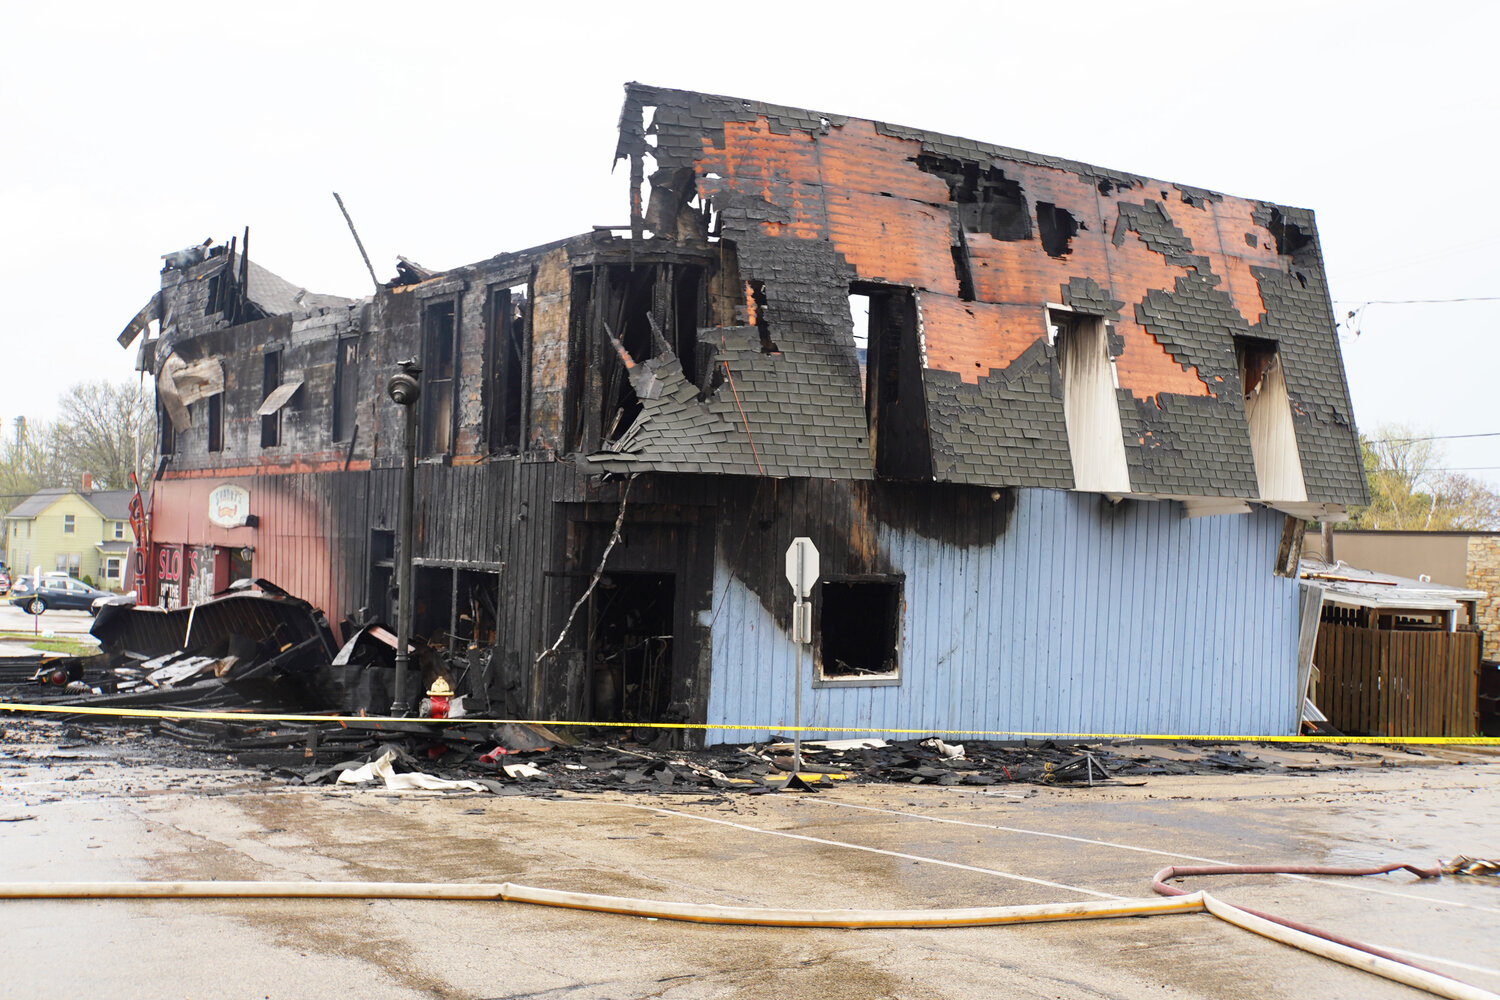 There were no injuries to occupants or firefighters after a third-alarm structure fire at a downtown Mt. Morris building Tuesday afternoon, Mt. Morris Fire Chief Rob Hough said. 